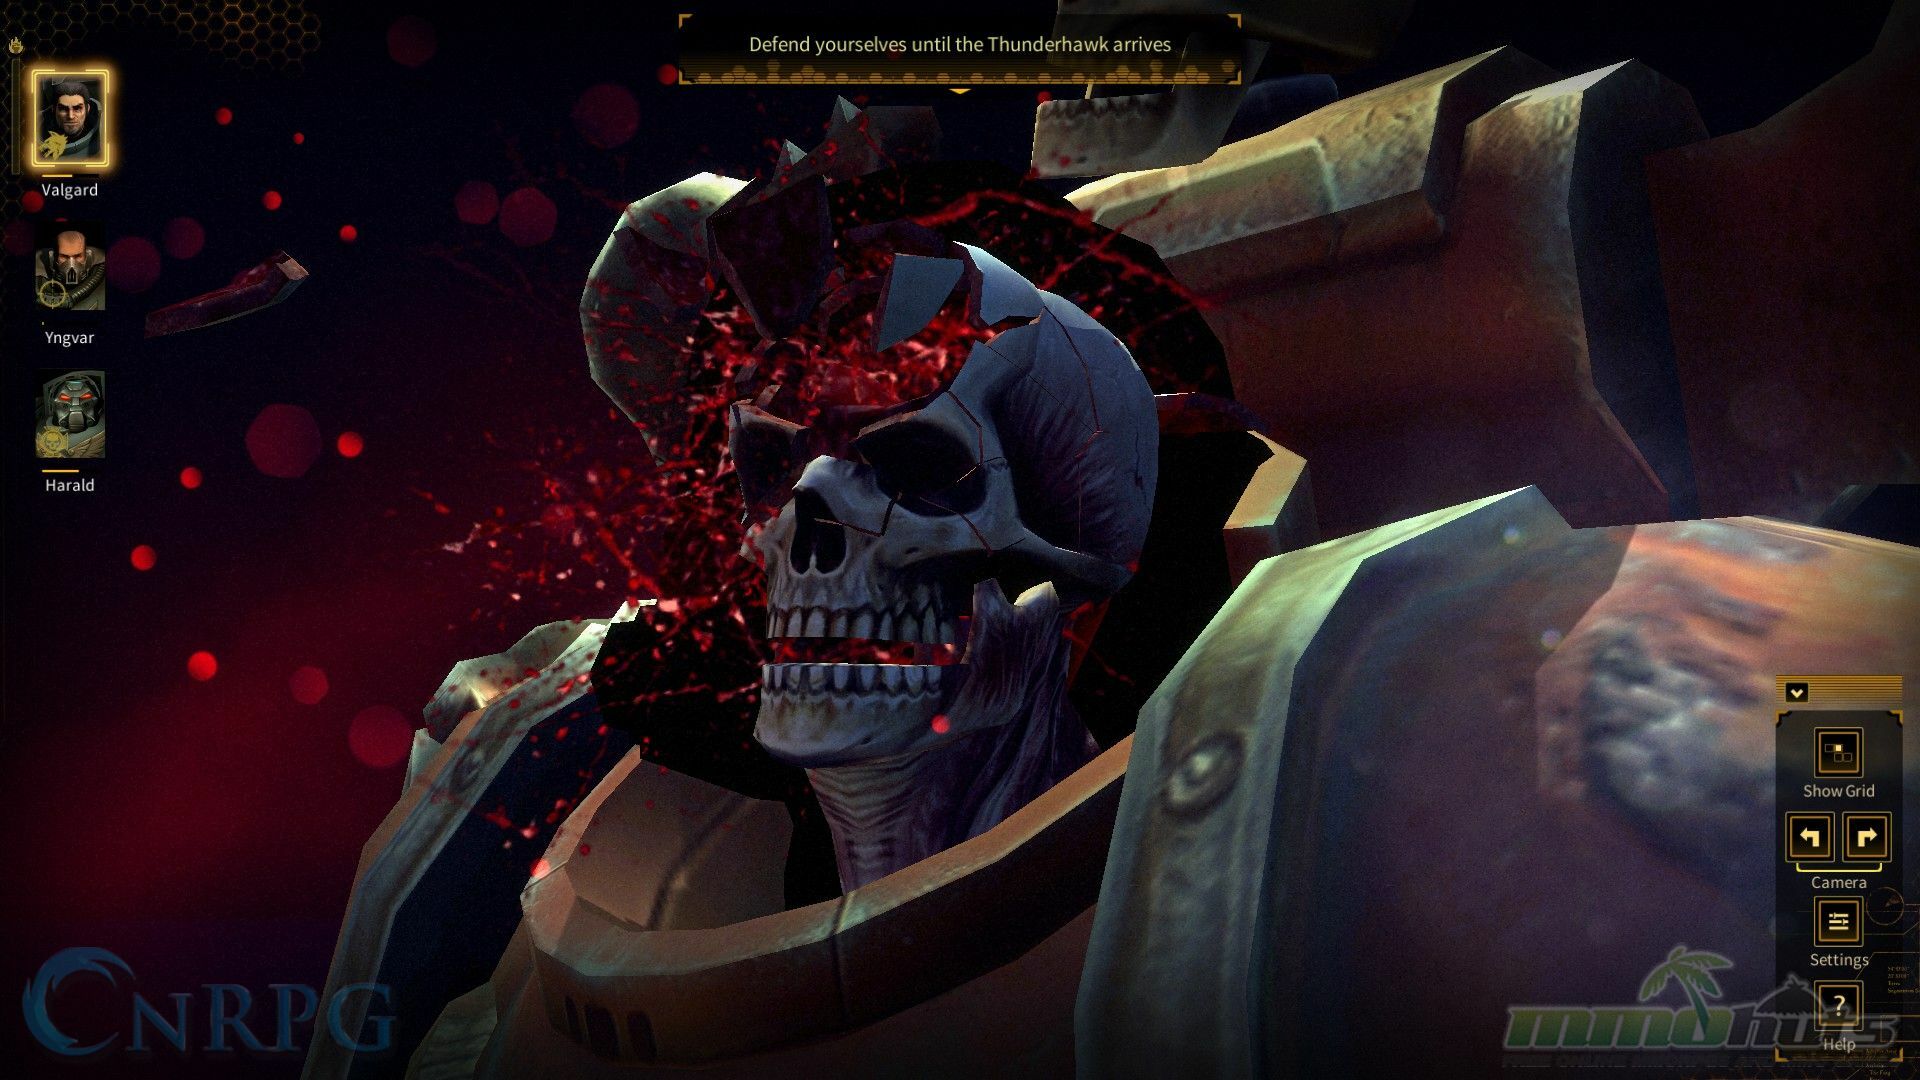 Warhammer 40k: Space Wolf Early Impressions